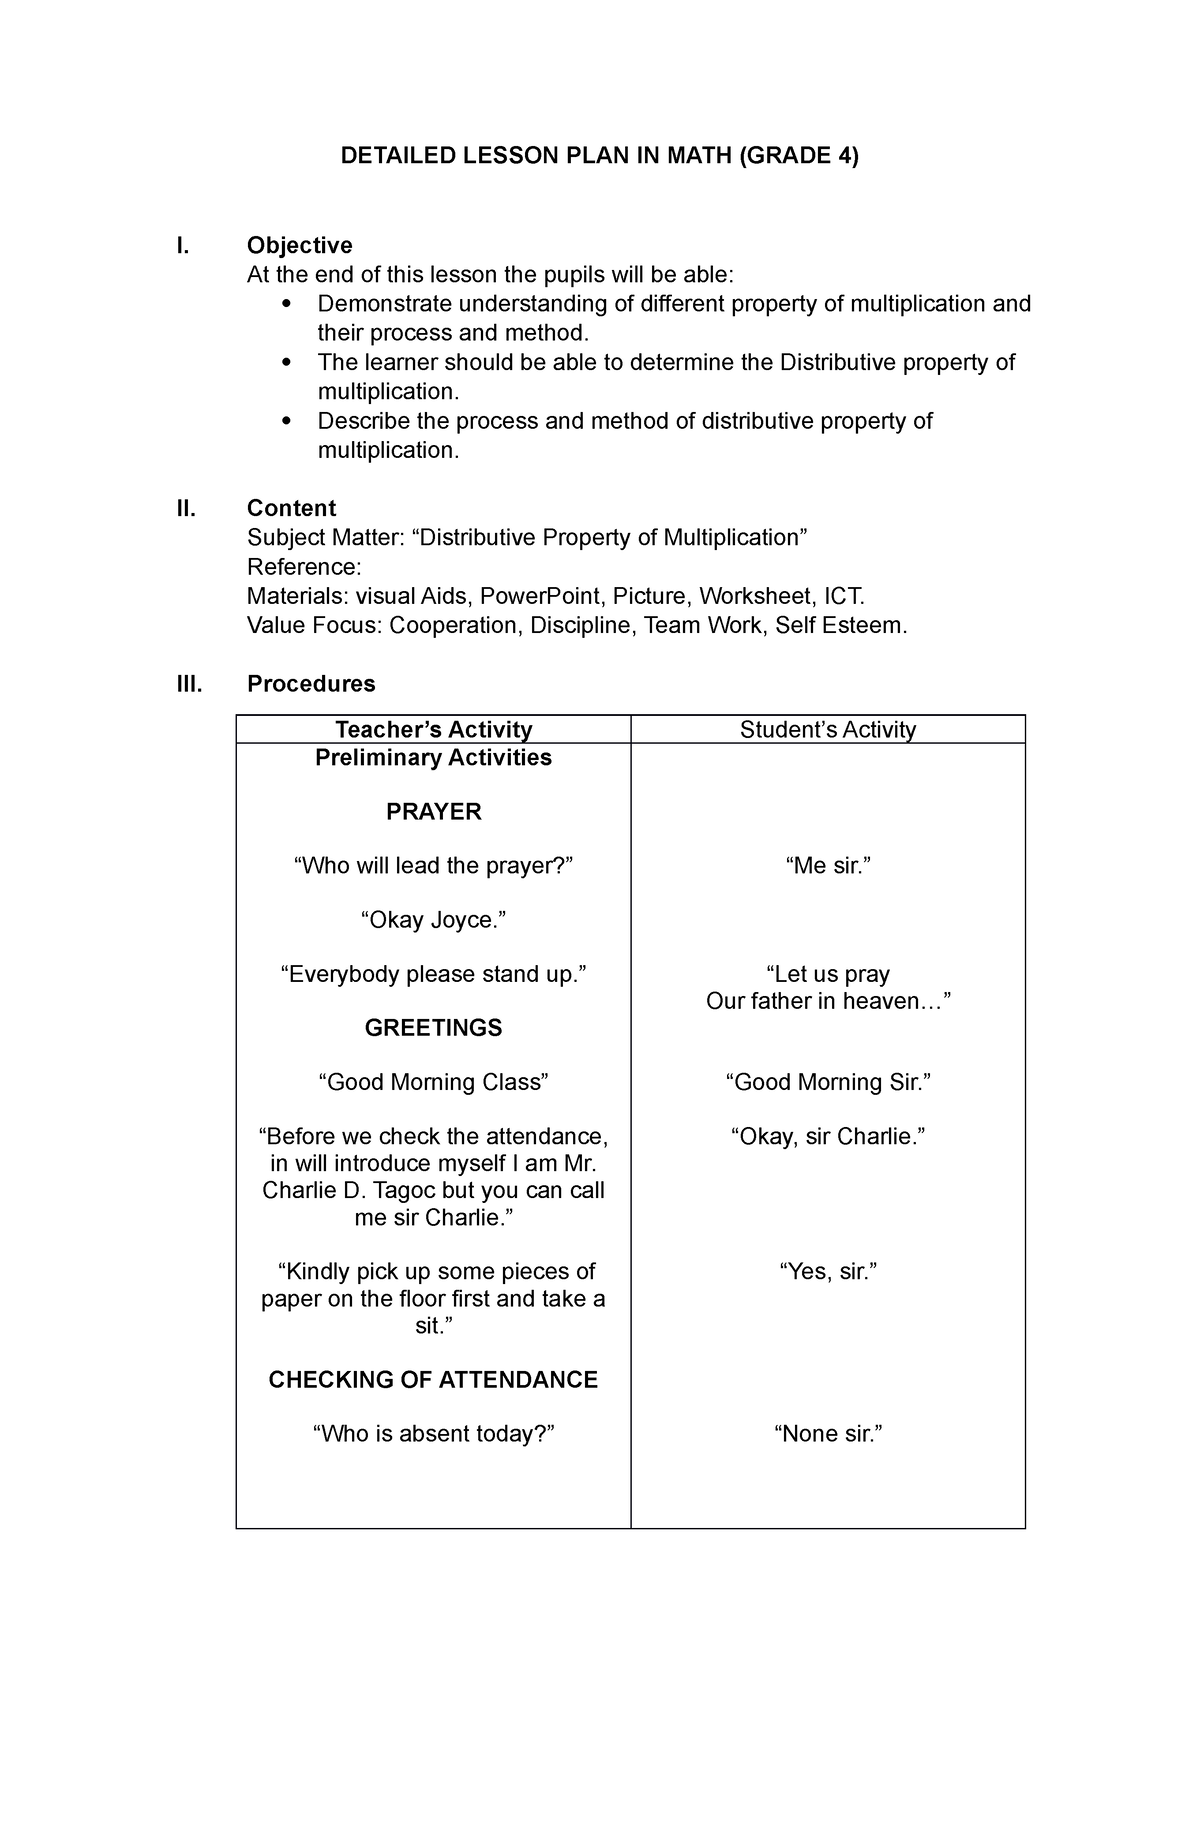 Detailed Lesson PLAN IN MATH DETAILED LESSON PLAN IN MATH GRADE 4 I Objective At The End Of